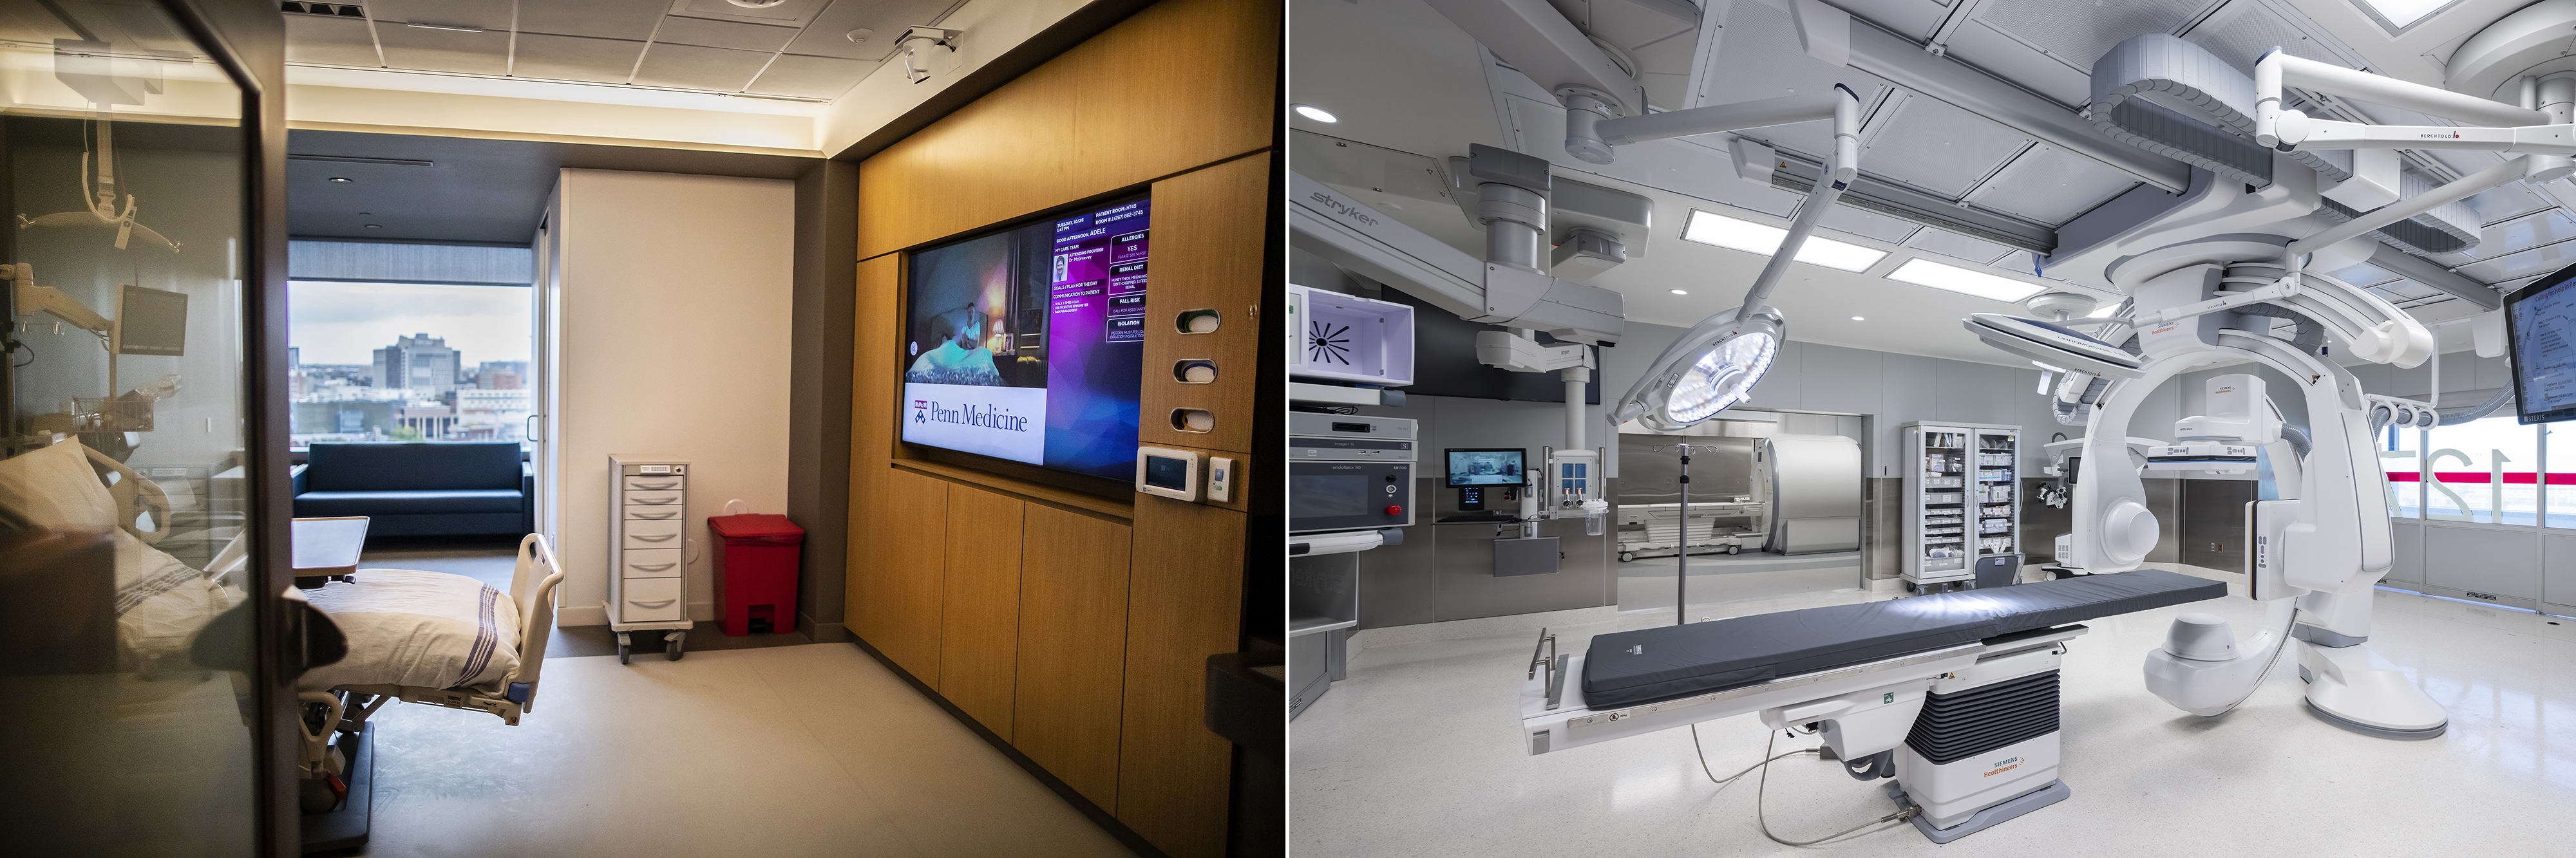 patient room and operating room